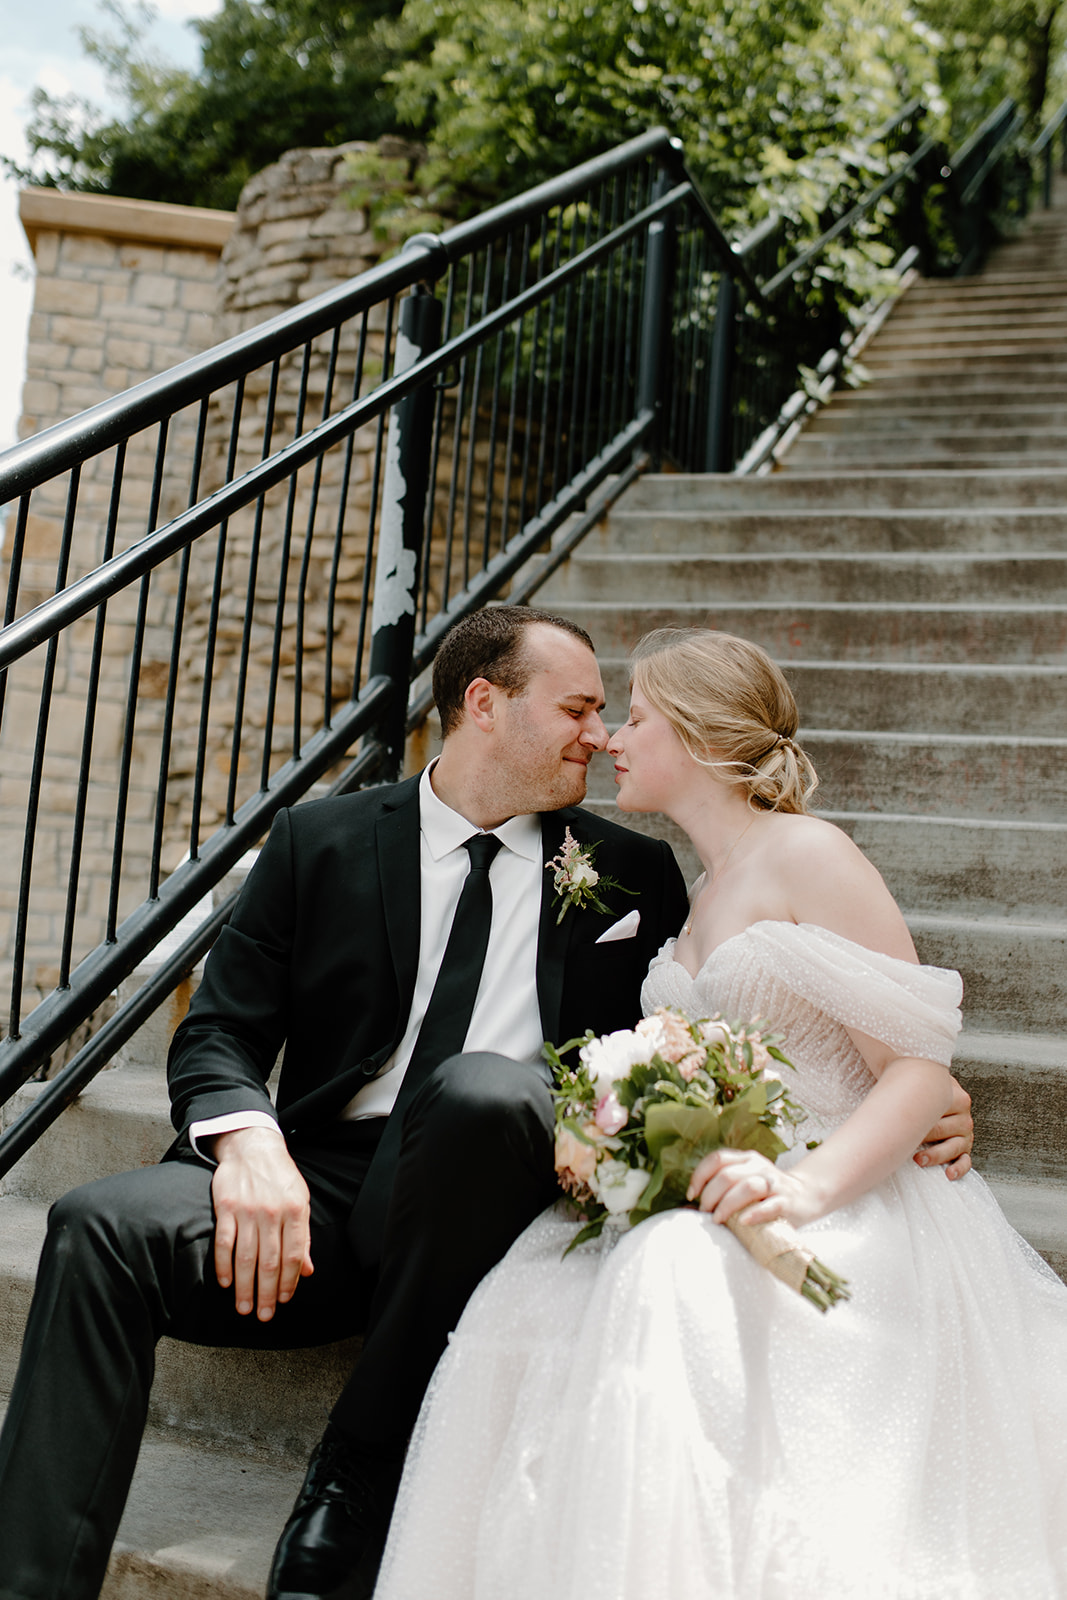 Bride and groom sitting on a staircase smiling at each other